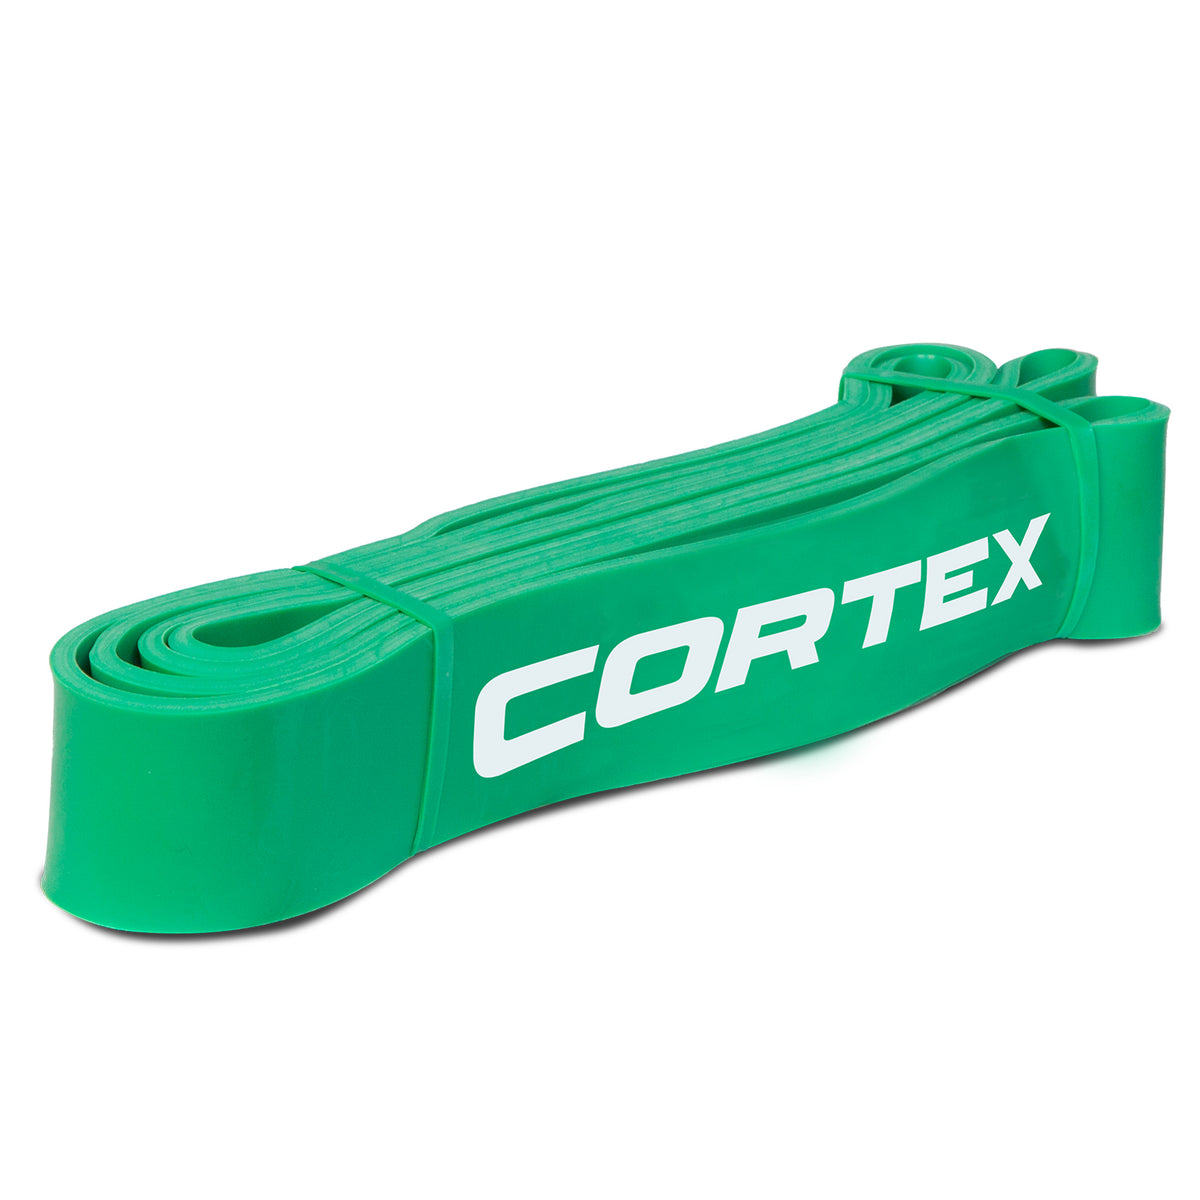 CORTEX Resistance Band Set of 5 (5-45mm)